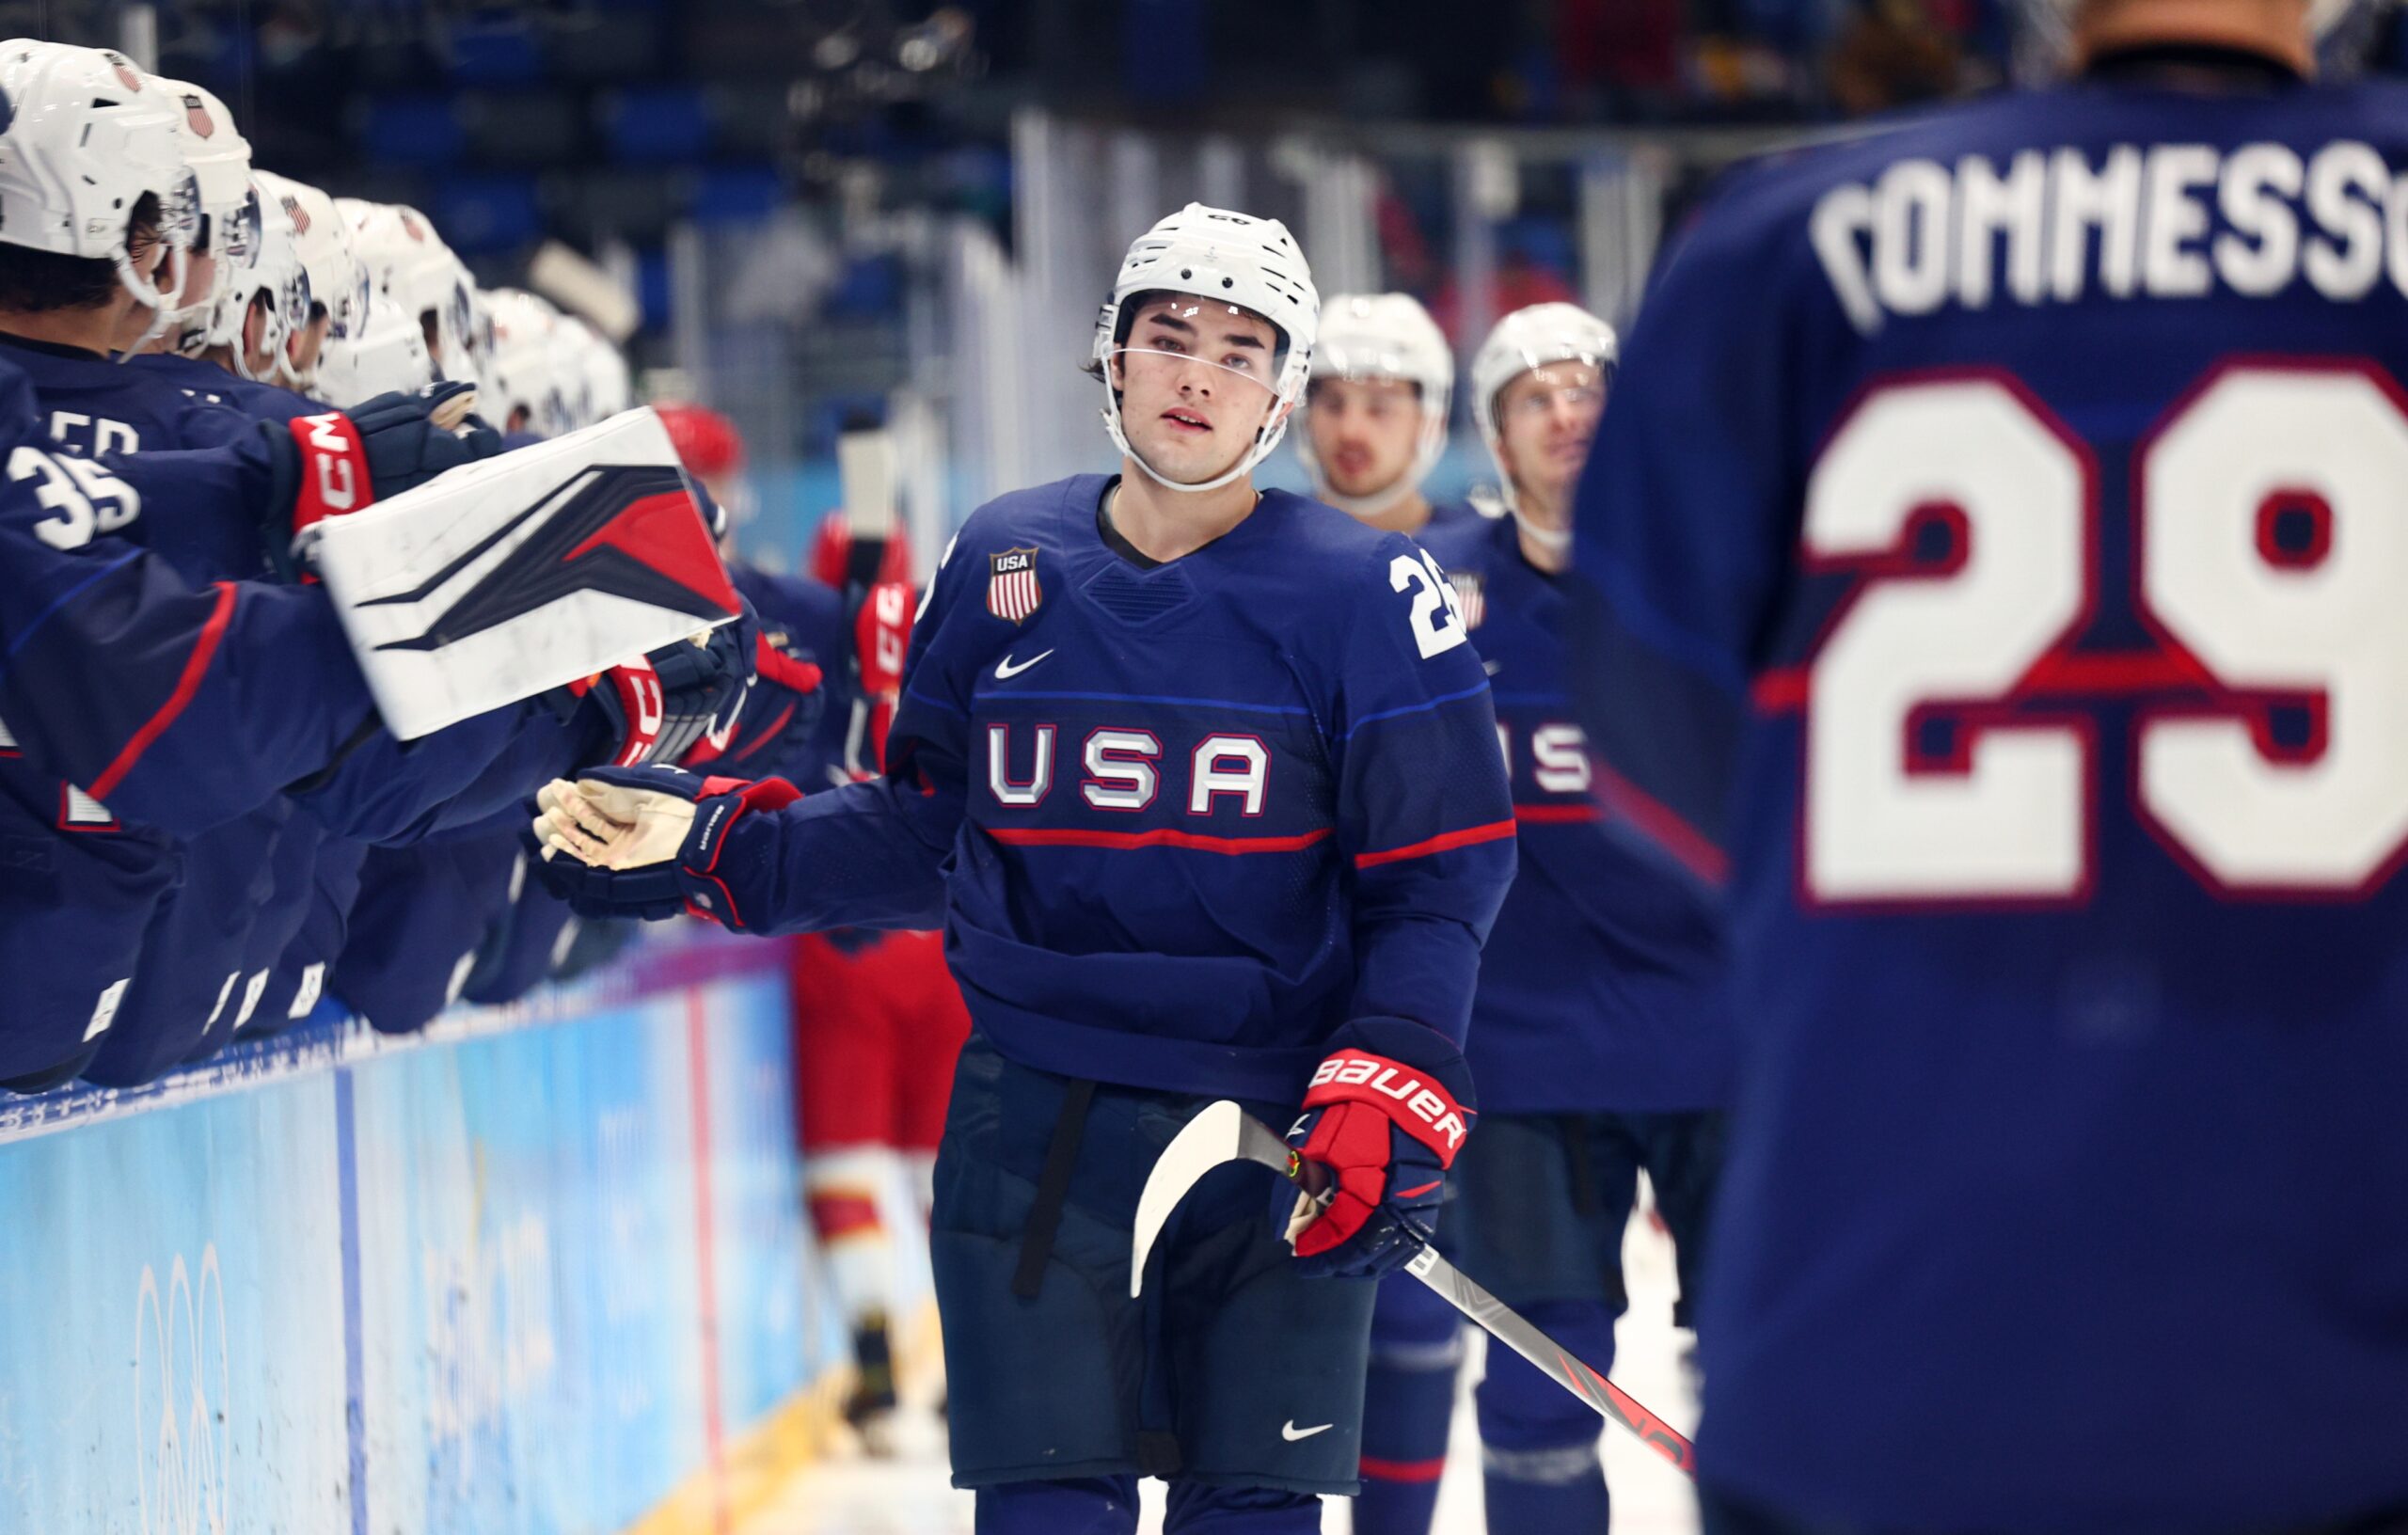 Farrell’s hat trick leads U.S. hockey team to win in Olympic opener